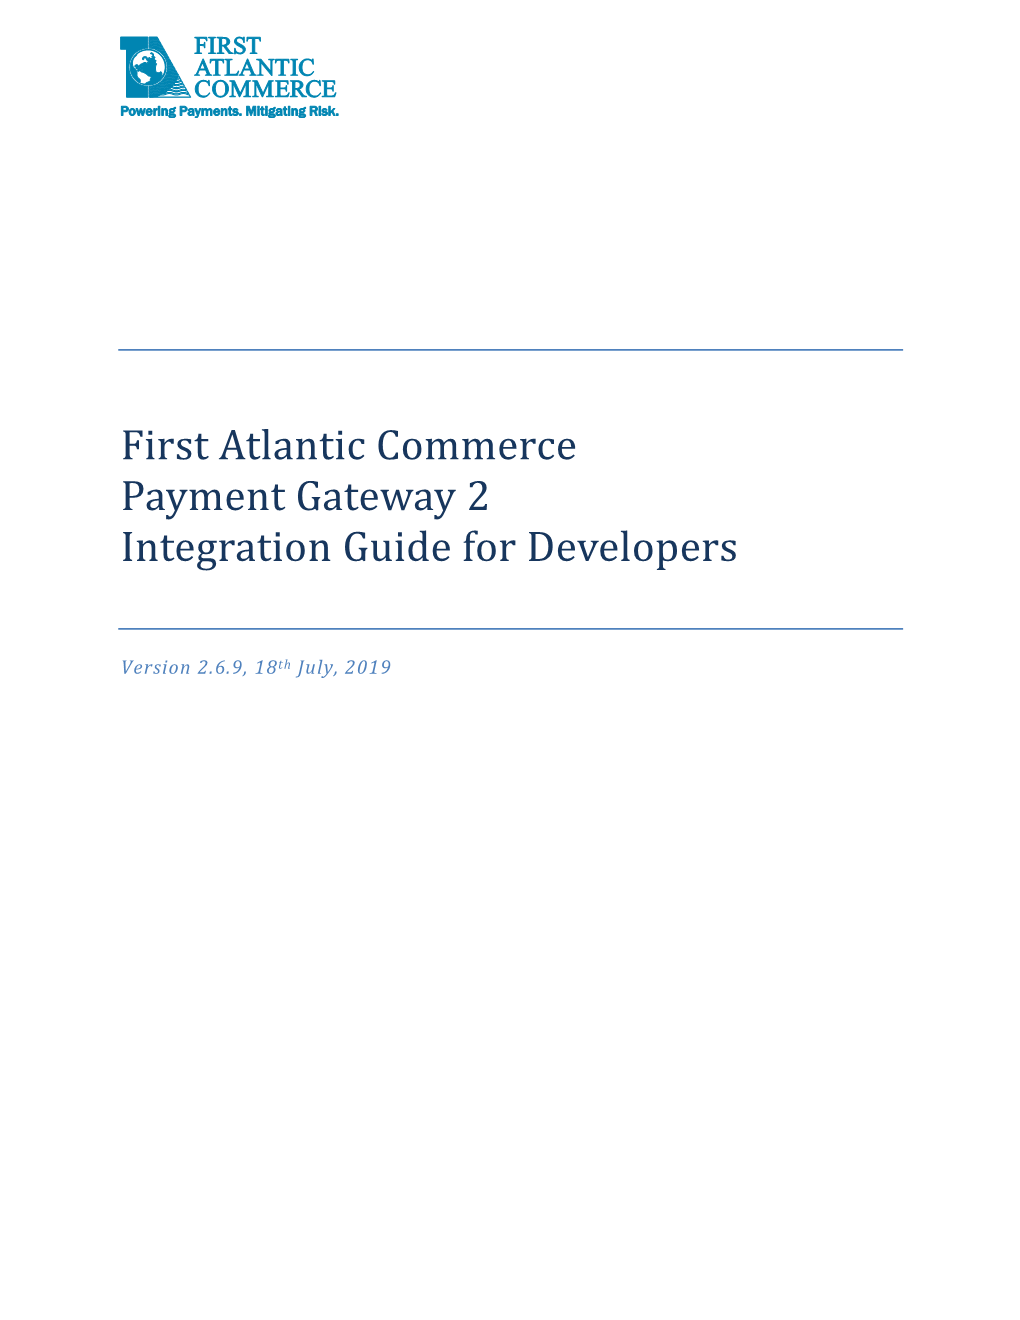 First Atlantic Commerce Payment Gateway 2 Integration Guide for Developers